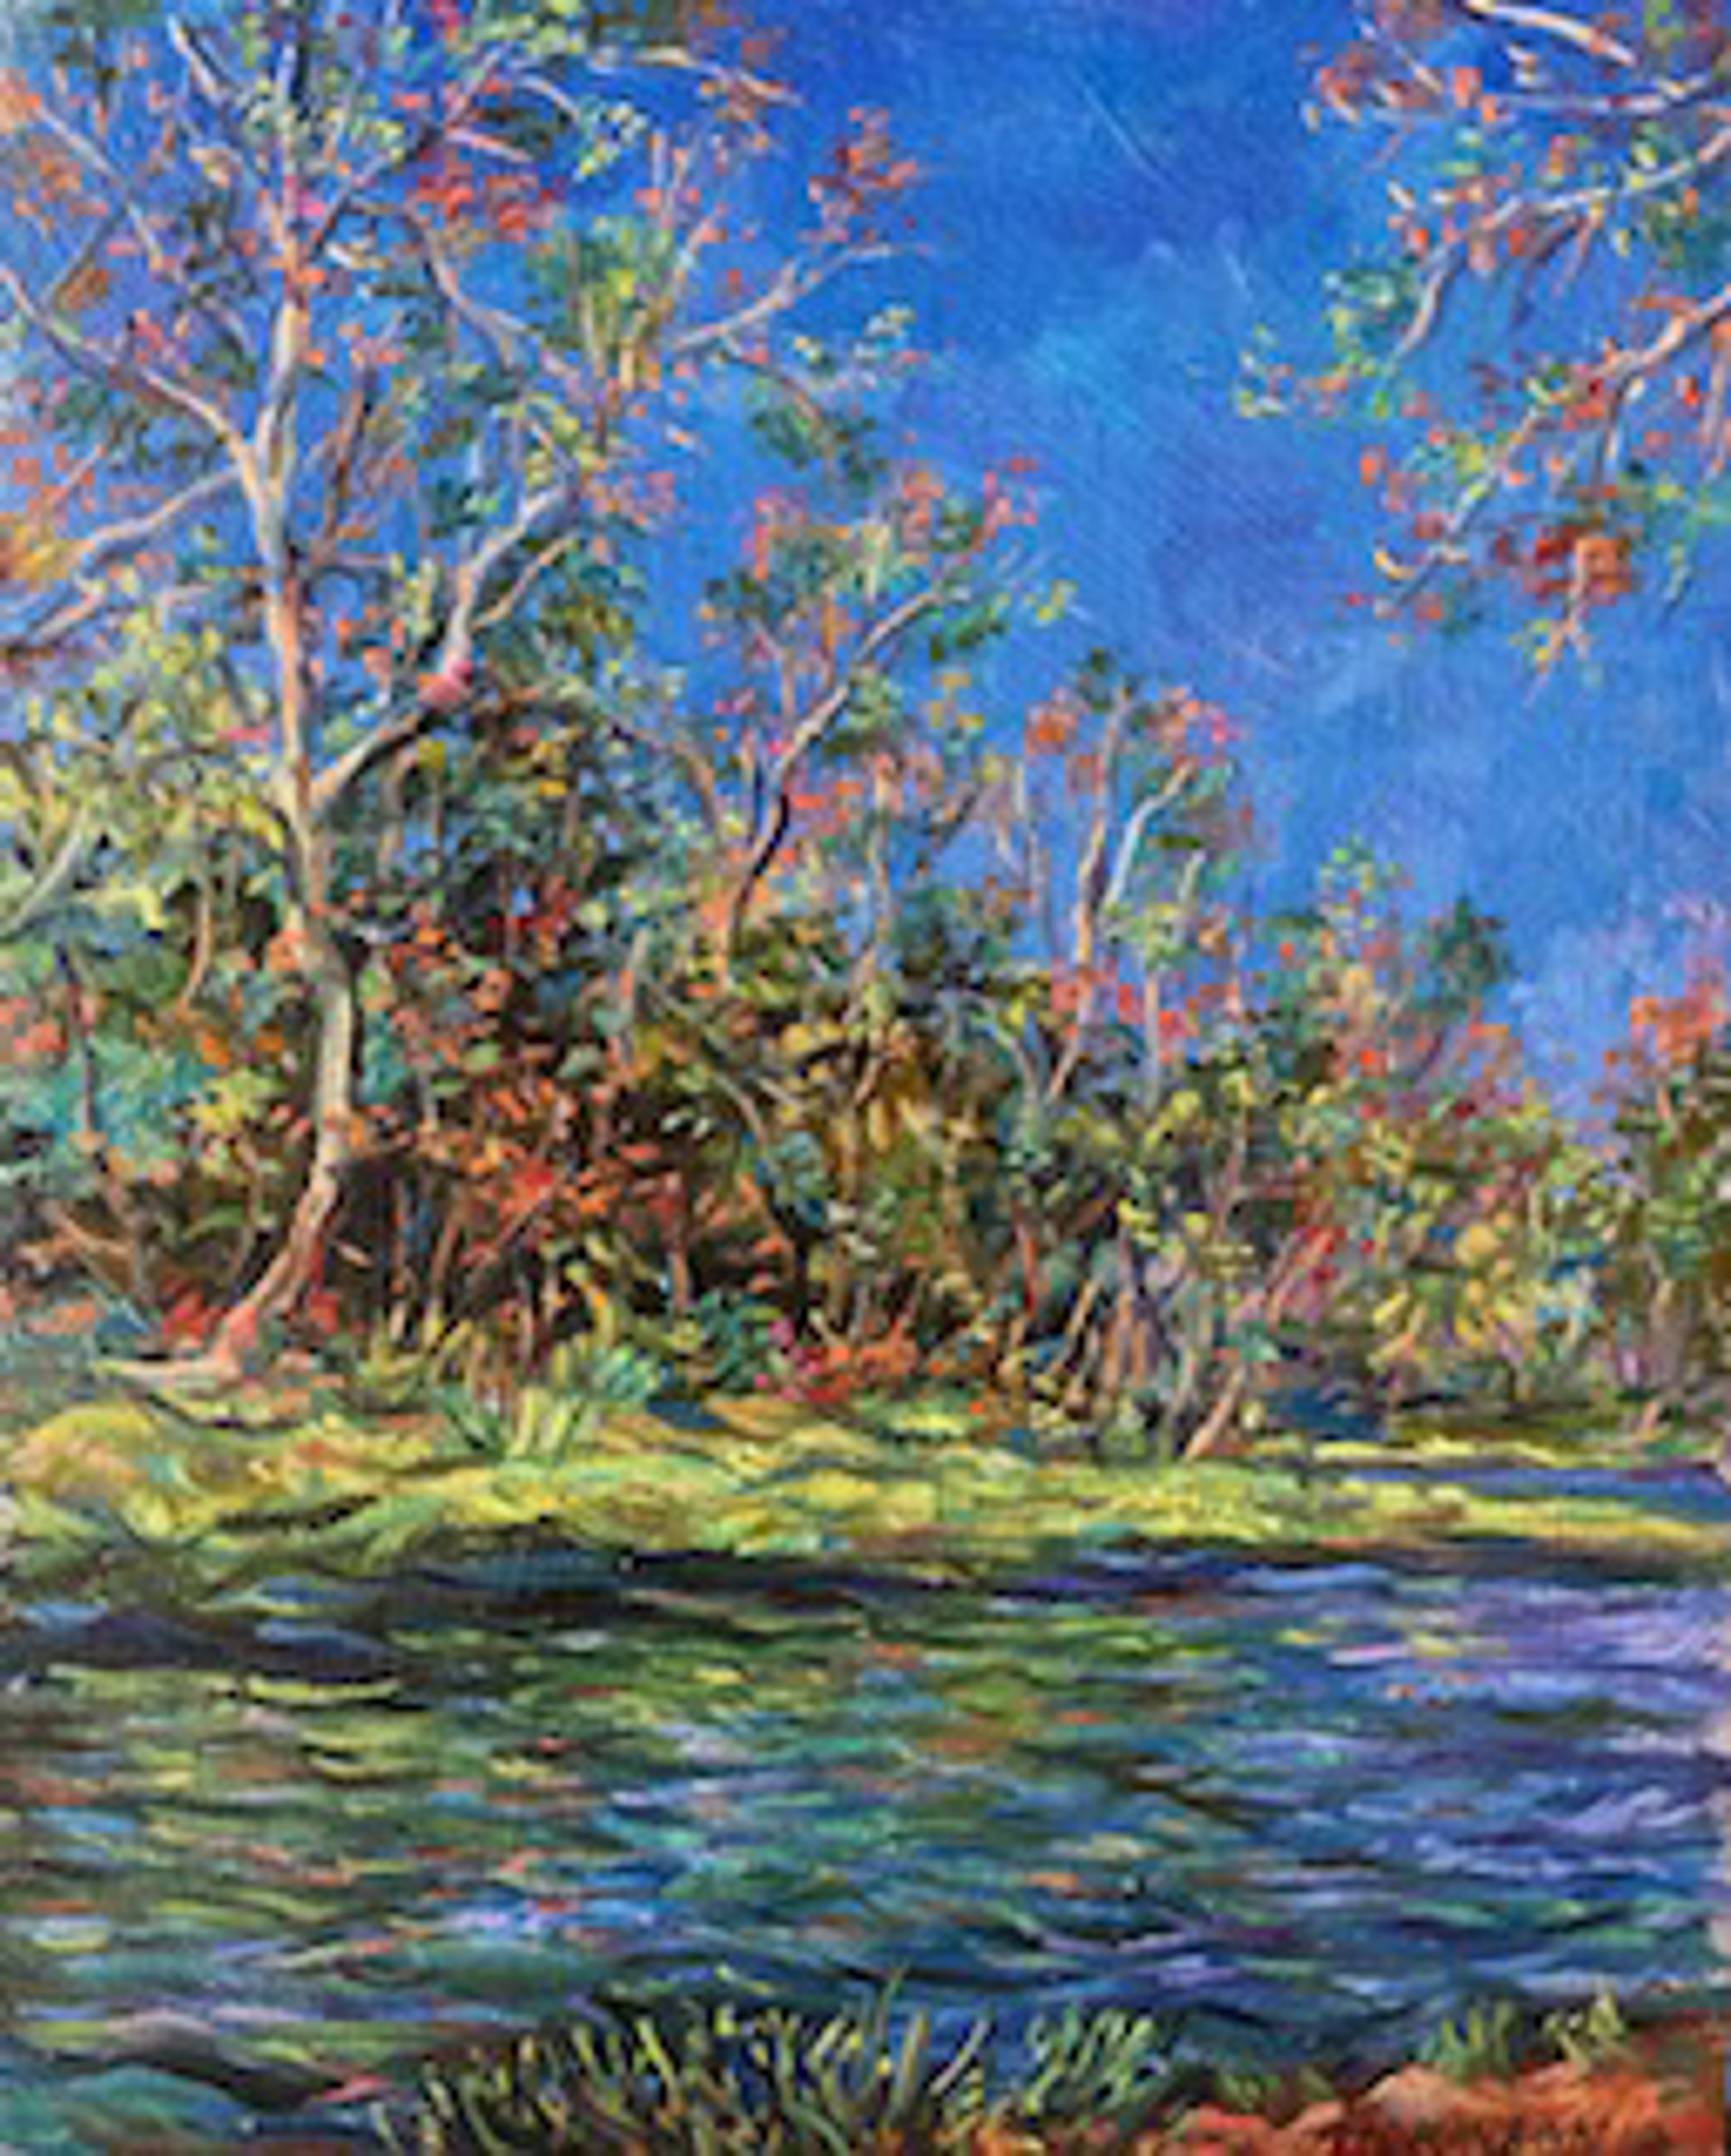 Wekiva River by Charles Dickinson